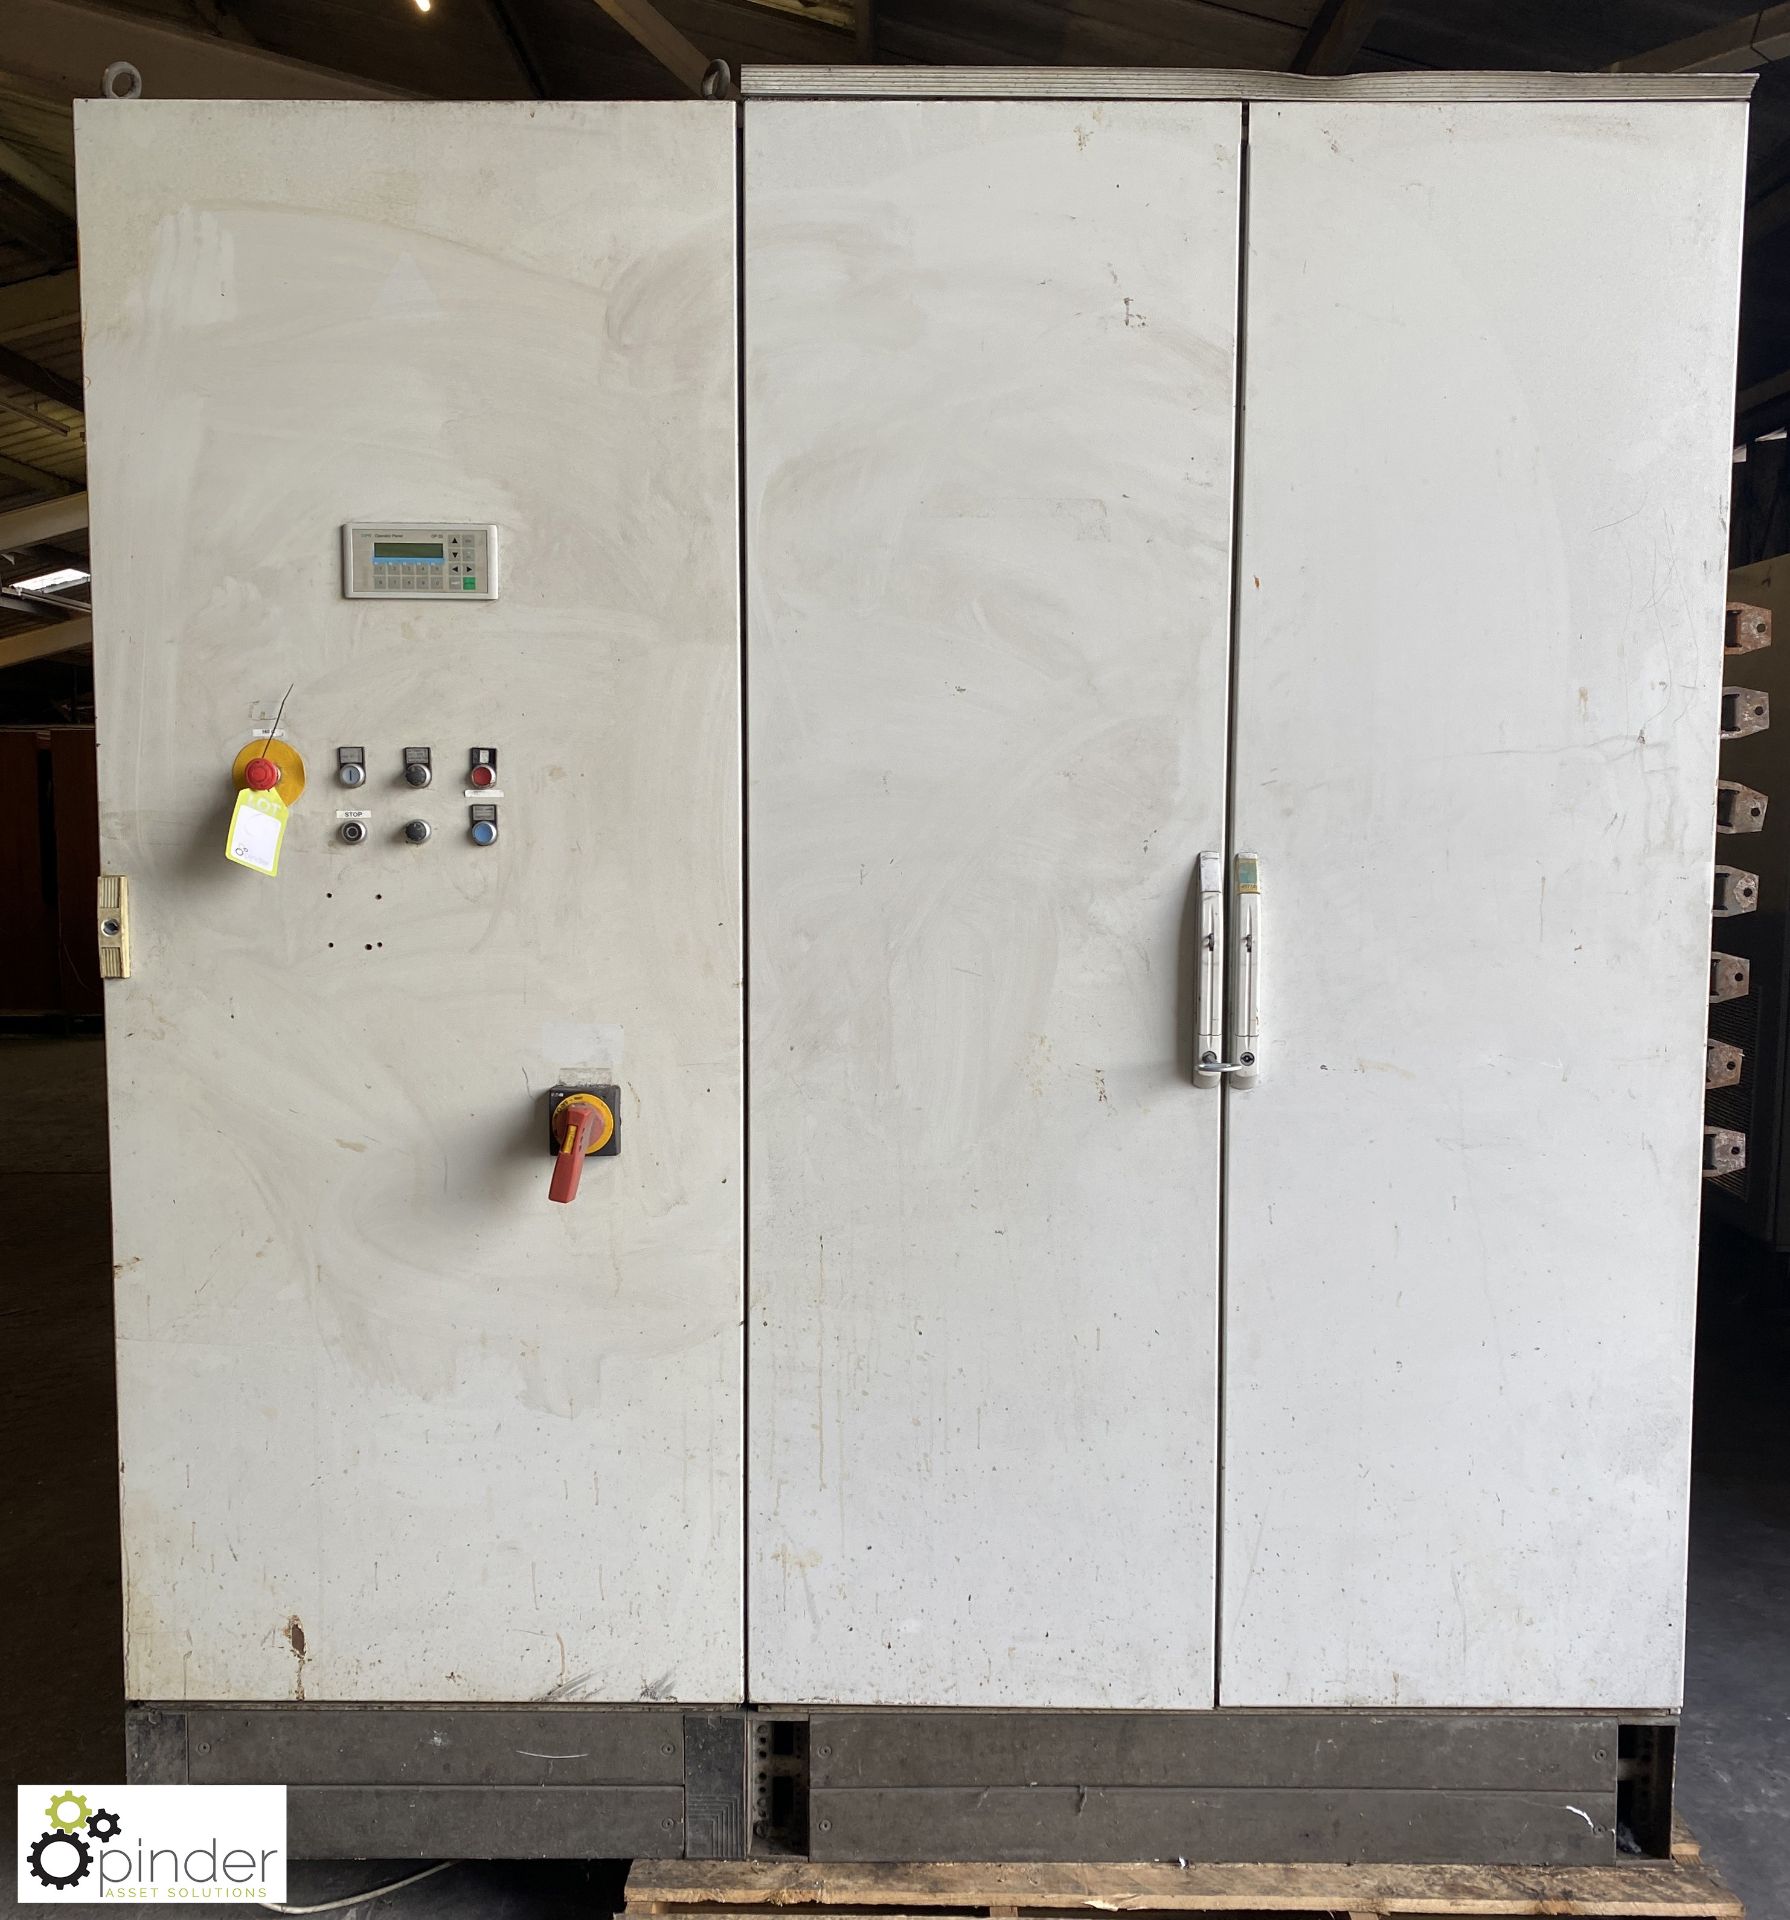 KEB Combivert Inverter Drive Panel, type 30F5ABW-WVBG, 415volts, 315kw (Location Carlisle Site 1) - Image 2 of 10